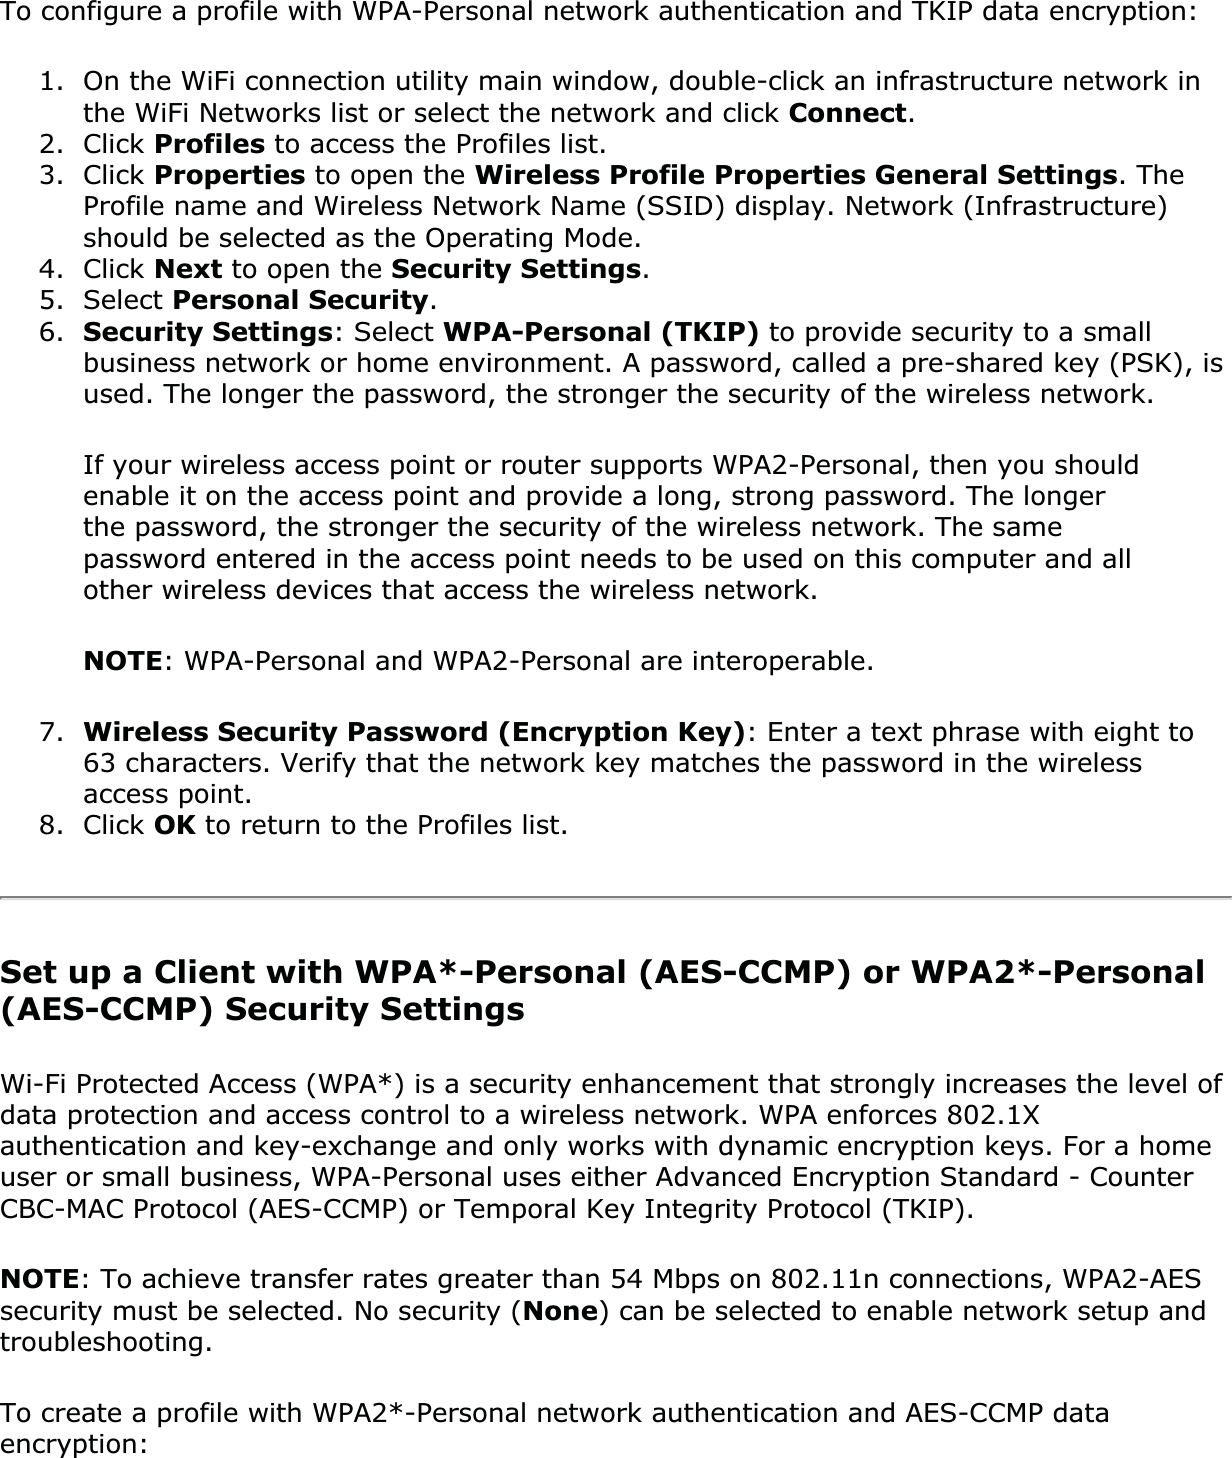 To configure a profile with WPA-Personal network authentication and TKIP data encryption:1. On the WiFi connection utility main window, double-click an infrastructure network in the WiFi Networks list or select the network and click Connect.2. Click Profiles to access the Profiles list.3. Click Properties to open the Wireless Profile Properties General Settings. The Profile name and Wireless Network Name (SSID) display. Network (Infrastructure) should be selected as the Operating Mode.4. Click Next to open the Security Settings.5. Select Personal Security.6. Security Settings: Select WPA-Personal (TKIP) to provide security to a small business network or home environment. A password, called a pre-shared key (PSK), is used. The longer the password, the stronger the security of the wireless network.If your wireless access point or router supports WPA2-Personal, then you should enable it on the access point and provide a long, strong password. The longer the password, the stronger the security of the wireless network. The same password entered in the access point needs to be used on this computer and all other wireless devices that access the wireless network.NOTE: WPA-Personal and WPA2-Personal are interoperable.7. Wireless Security Password (Encryption Key): Enter a text phrase with eight to 63 characters. Verify that the network key matches the password in the wireless access point.8. Click OK to return to the Profiles list.Set up a Client with WPA*-Personal (AES-CCMP) or WPA2*-Personal (AES-CCMP) Security SettingsWi-Fi Protected Access (WPA*) is a security enhancement that strongly increases the level of data protection and access control to a wireless network. WPA enforces 802.1X authentication and key-exchange and only works with dynamic encryption keys. For a home user or small business, WPA-Personal uses either Advanced Encryption Standard - Counter CBC-MAC Protocol (AES-CCMP) or Temporal Key Integrity Protocol (TKIP).NOTE: To achieve transfer rates greater than 54 Mbps on 802.11n connections, WPA2-AES security must be selected. No security (None) can be selected to enable network setup and troubleshooting.To create a profile with WPA2*-Personal network authentication and AES-CCMP data encryption: